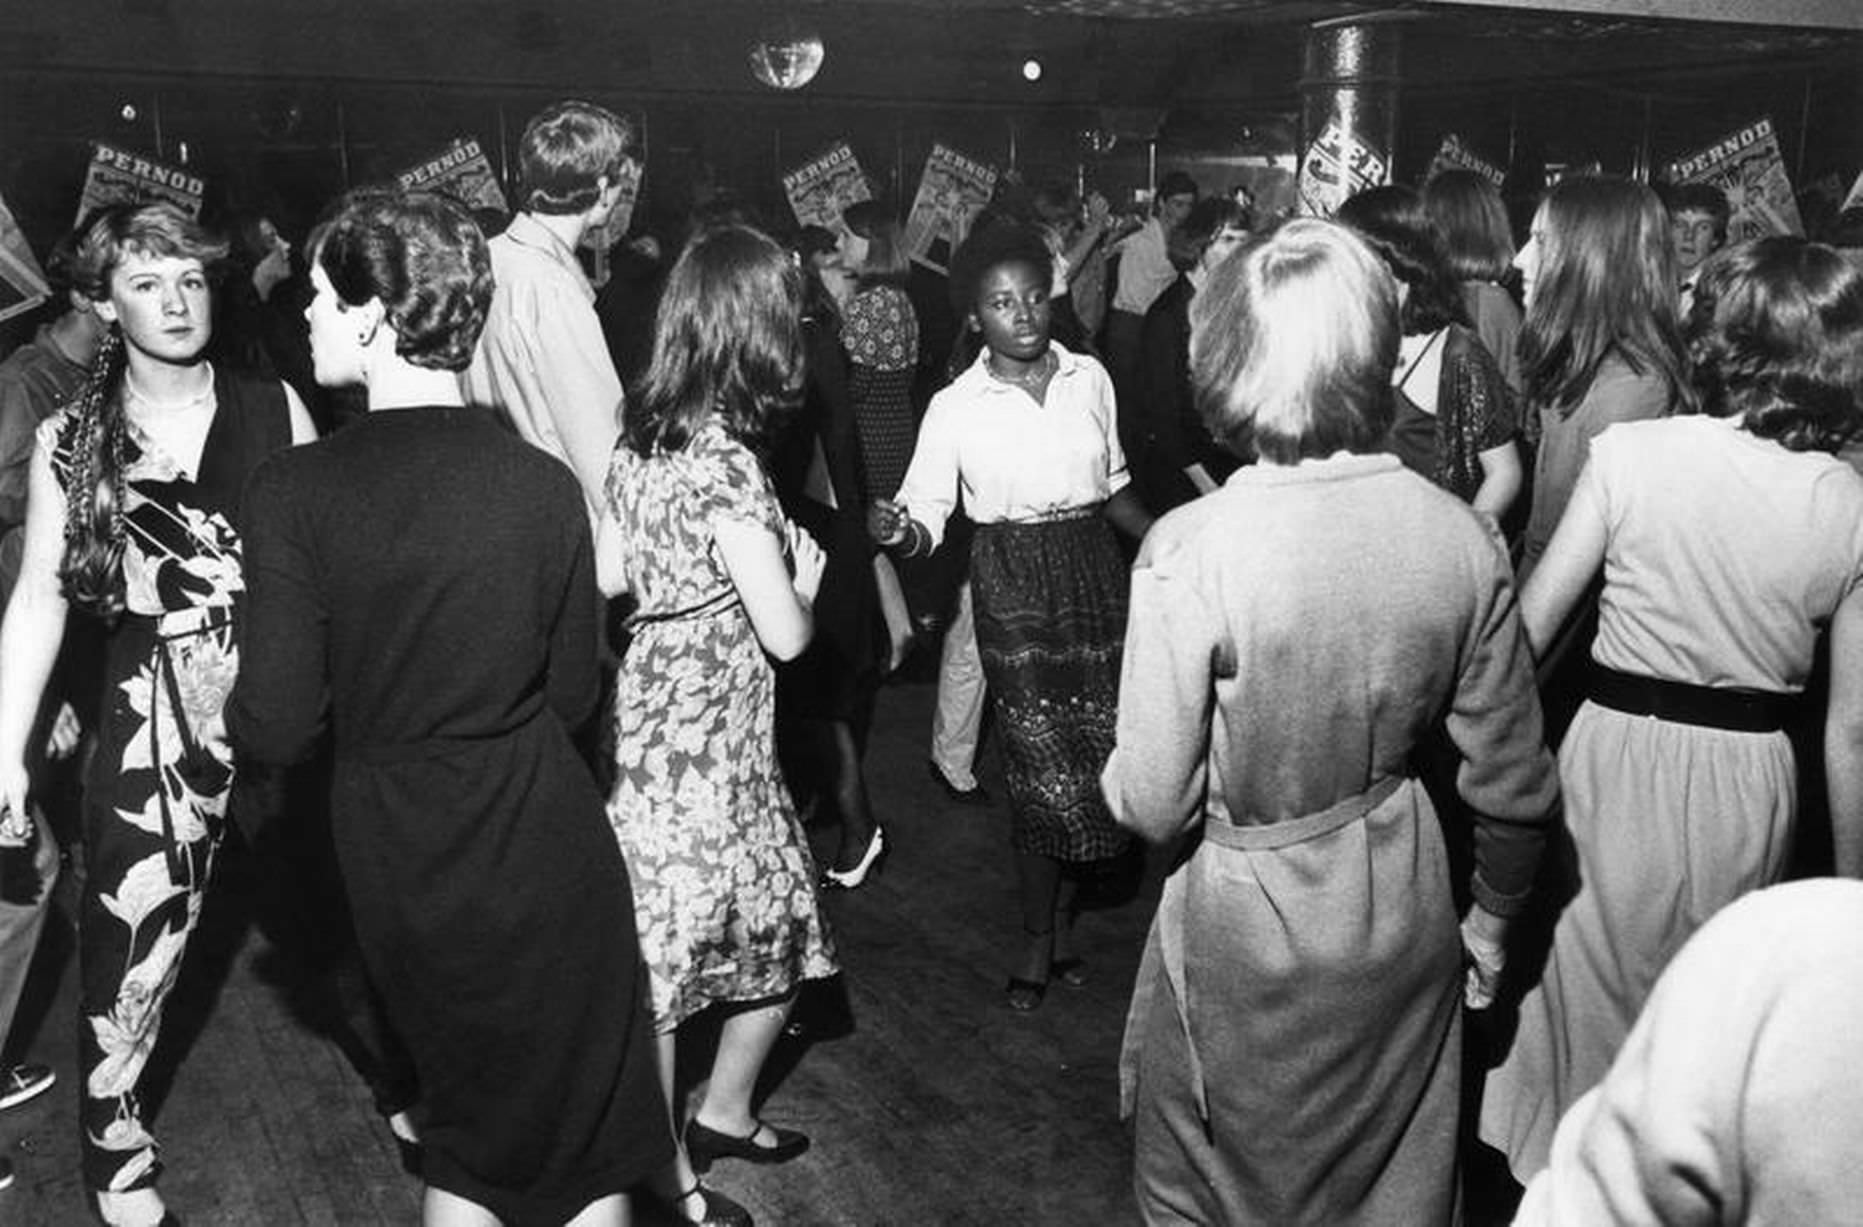 Cagney's Club, Fraser Street, Liverpool, 1985.